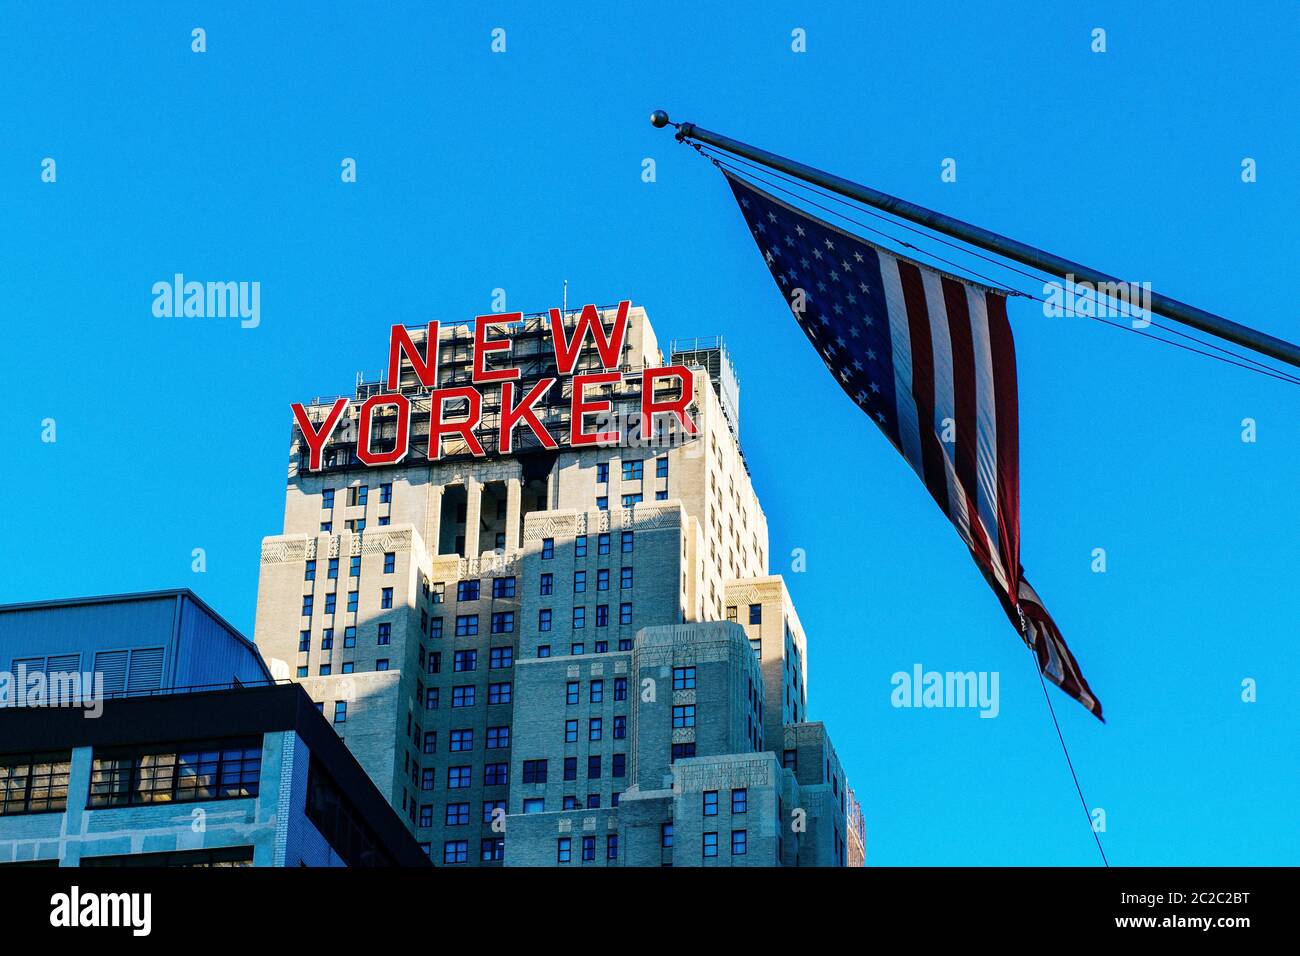 Winter November 2013 New Yorker Sign at Manhattan Midtown hotel with flag, New York United States Stock Photo